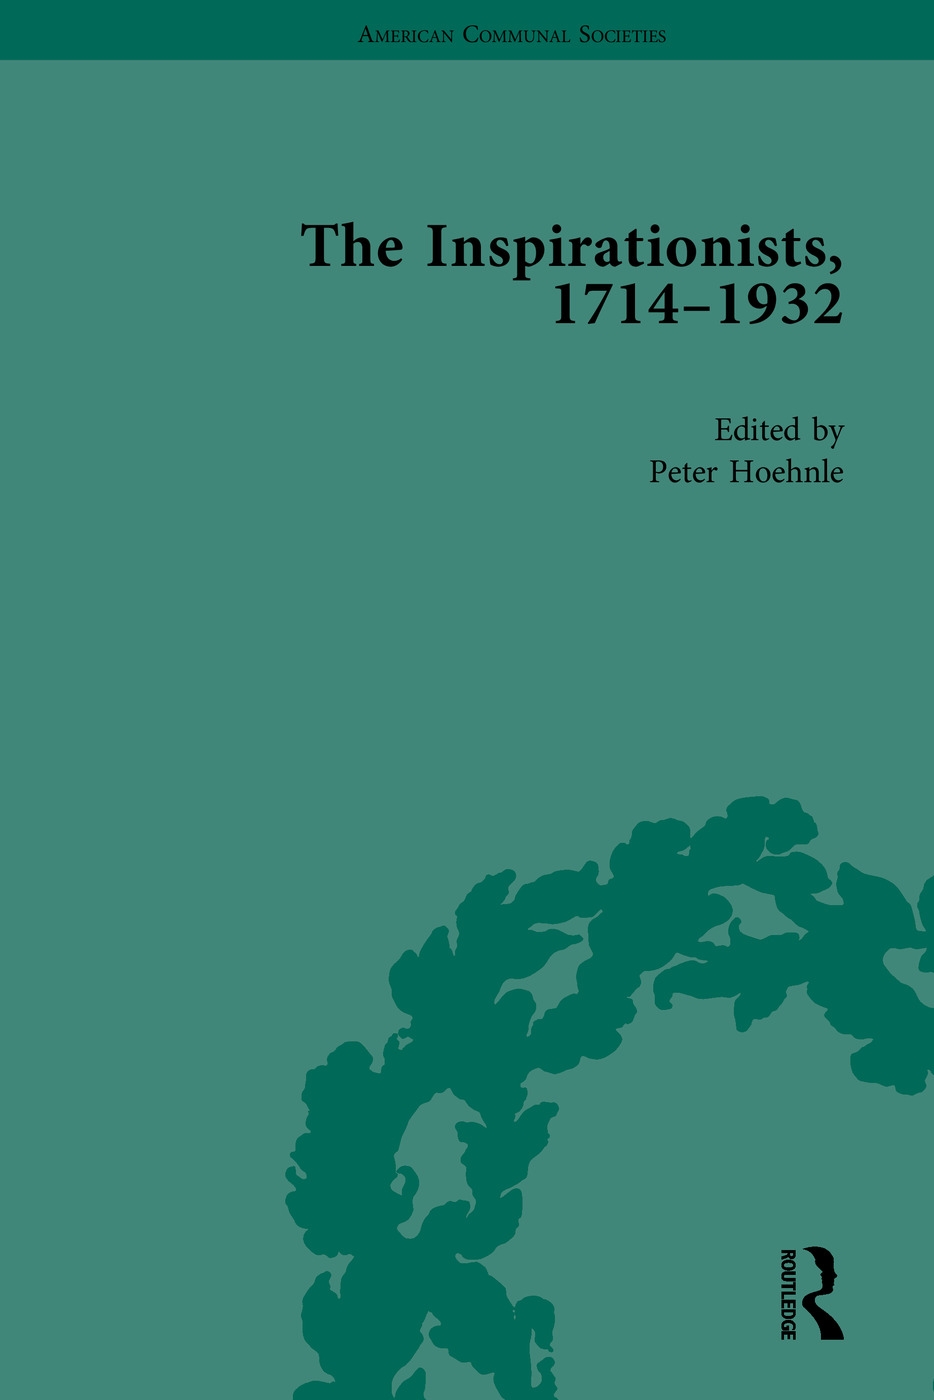 The Inspirationists, 1714 - 1932